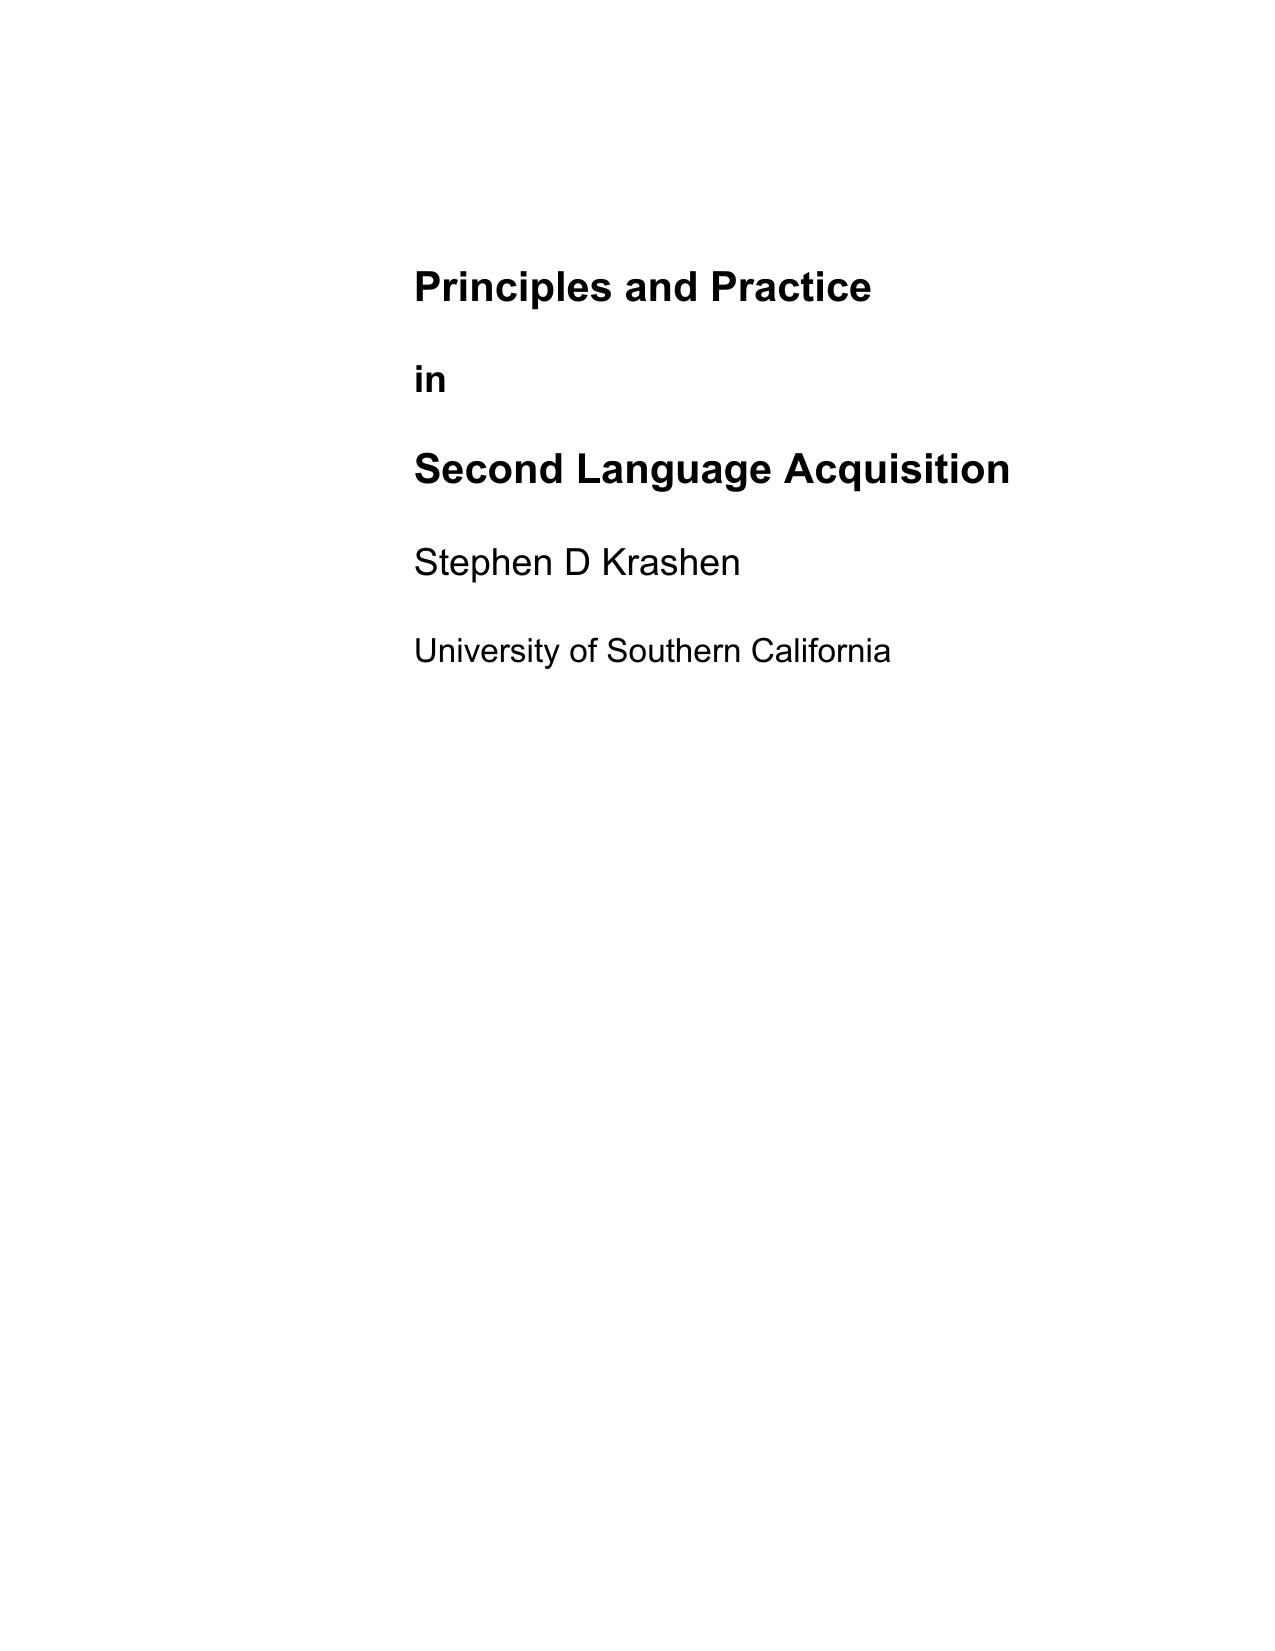 Principles and Practice in Second Language Acquisition (Language Teaching Methodology) by Stephen D. Krashen